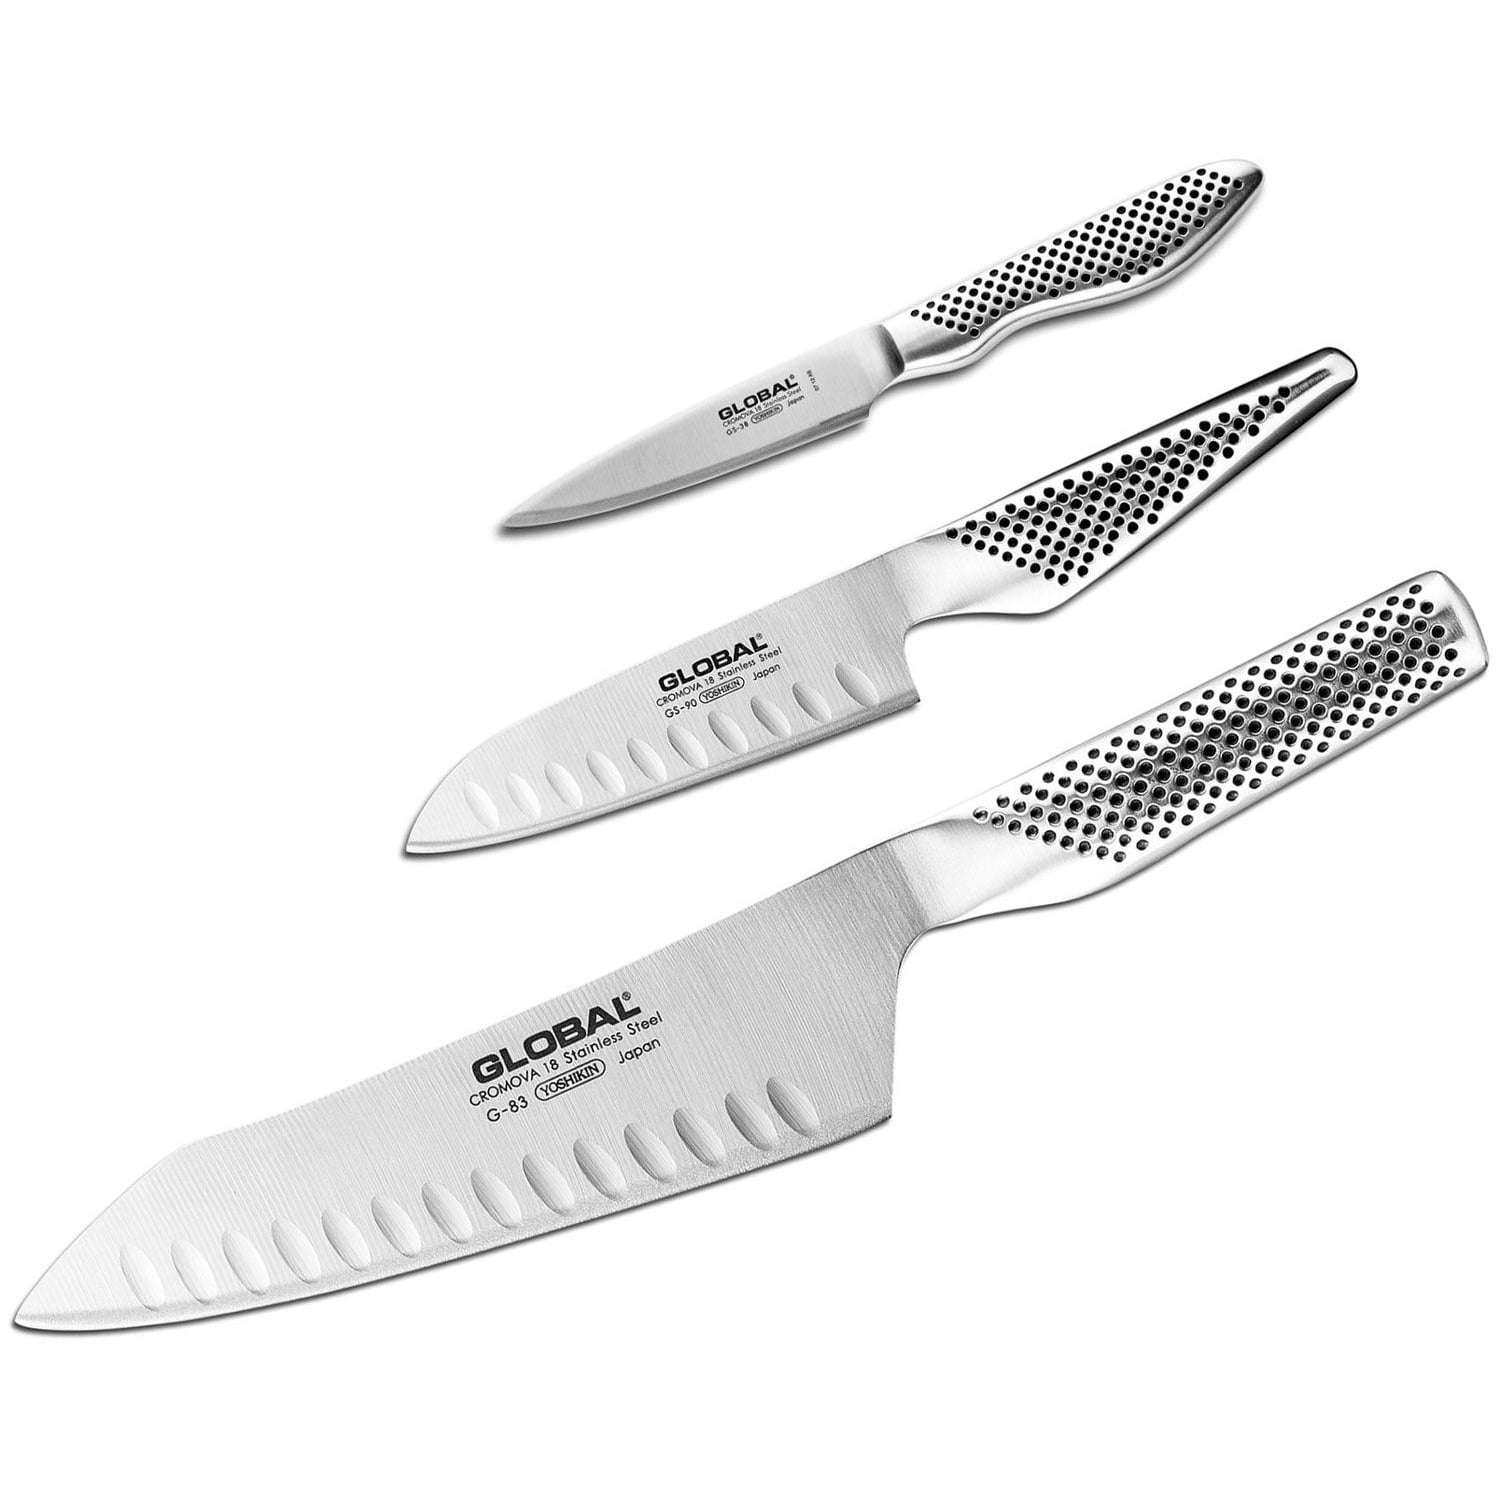 Global Classic Stainless Steel 3-Piece Knife Set 